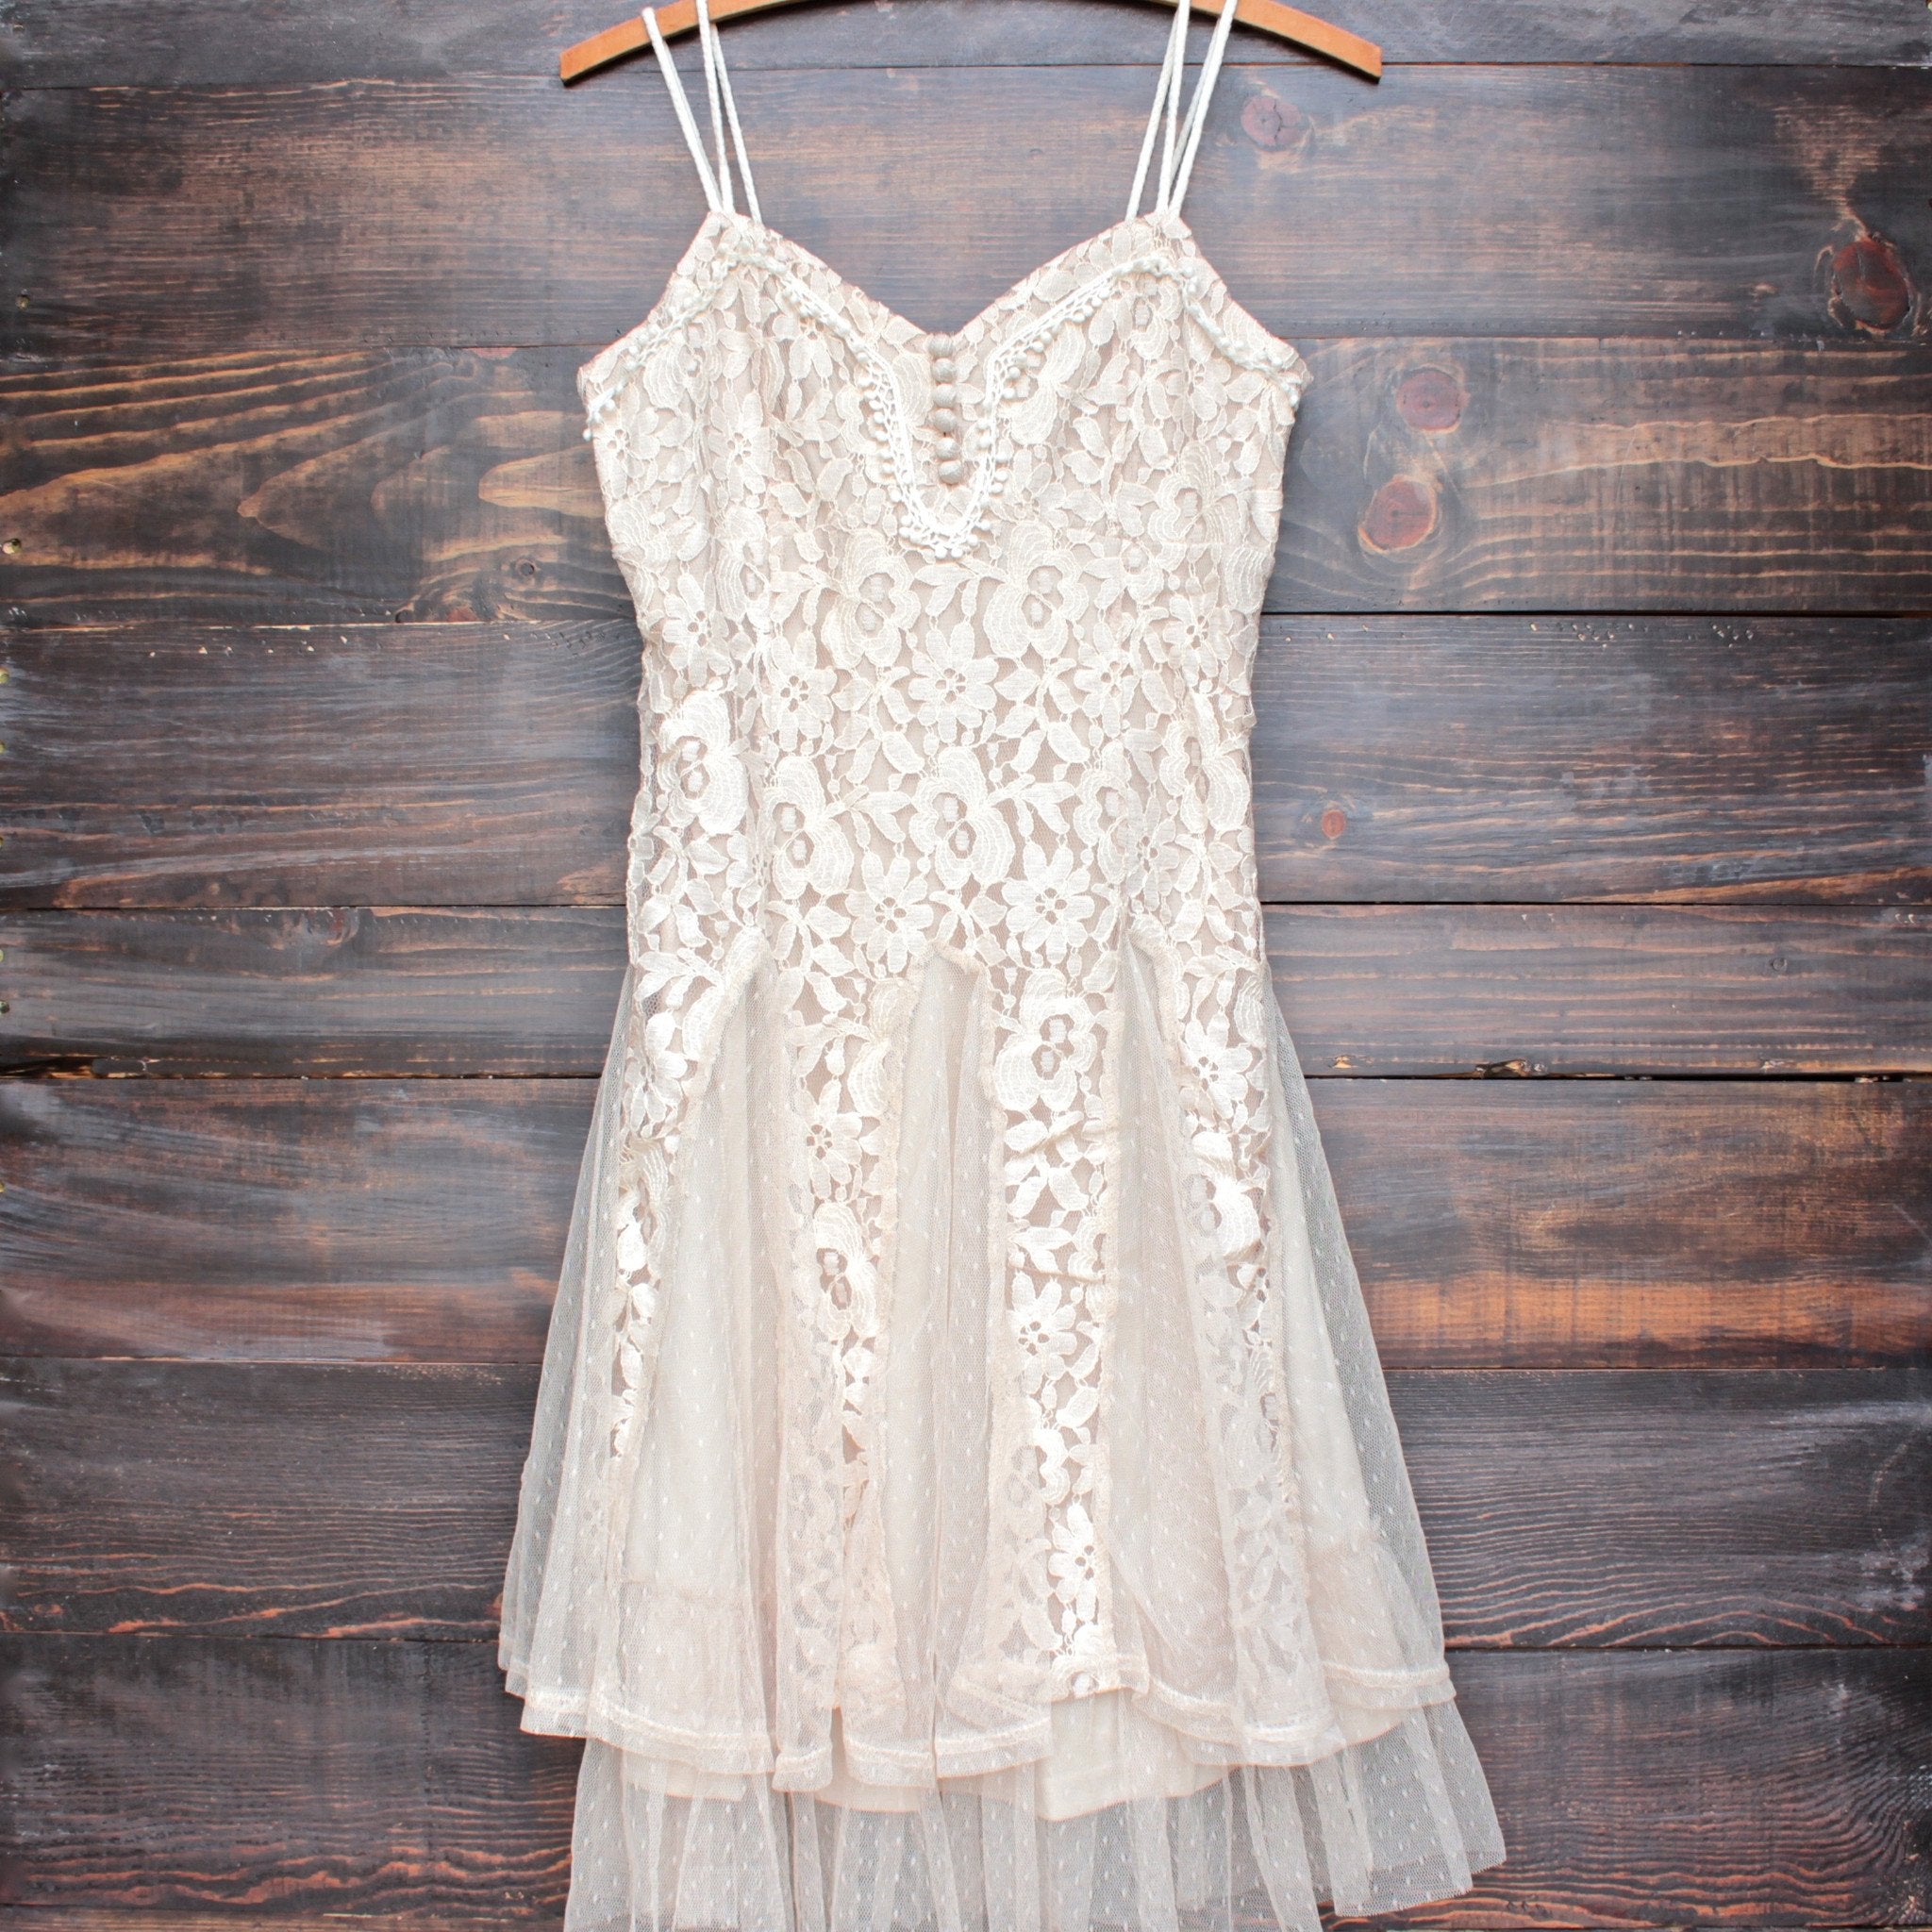 paper hearts - Ryu time will tell lace dress in champagne – shophearts